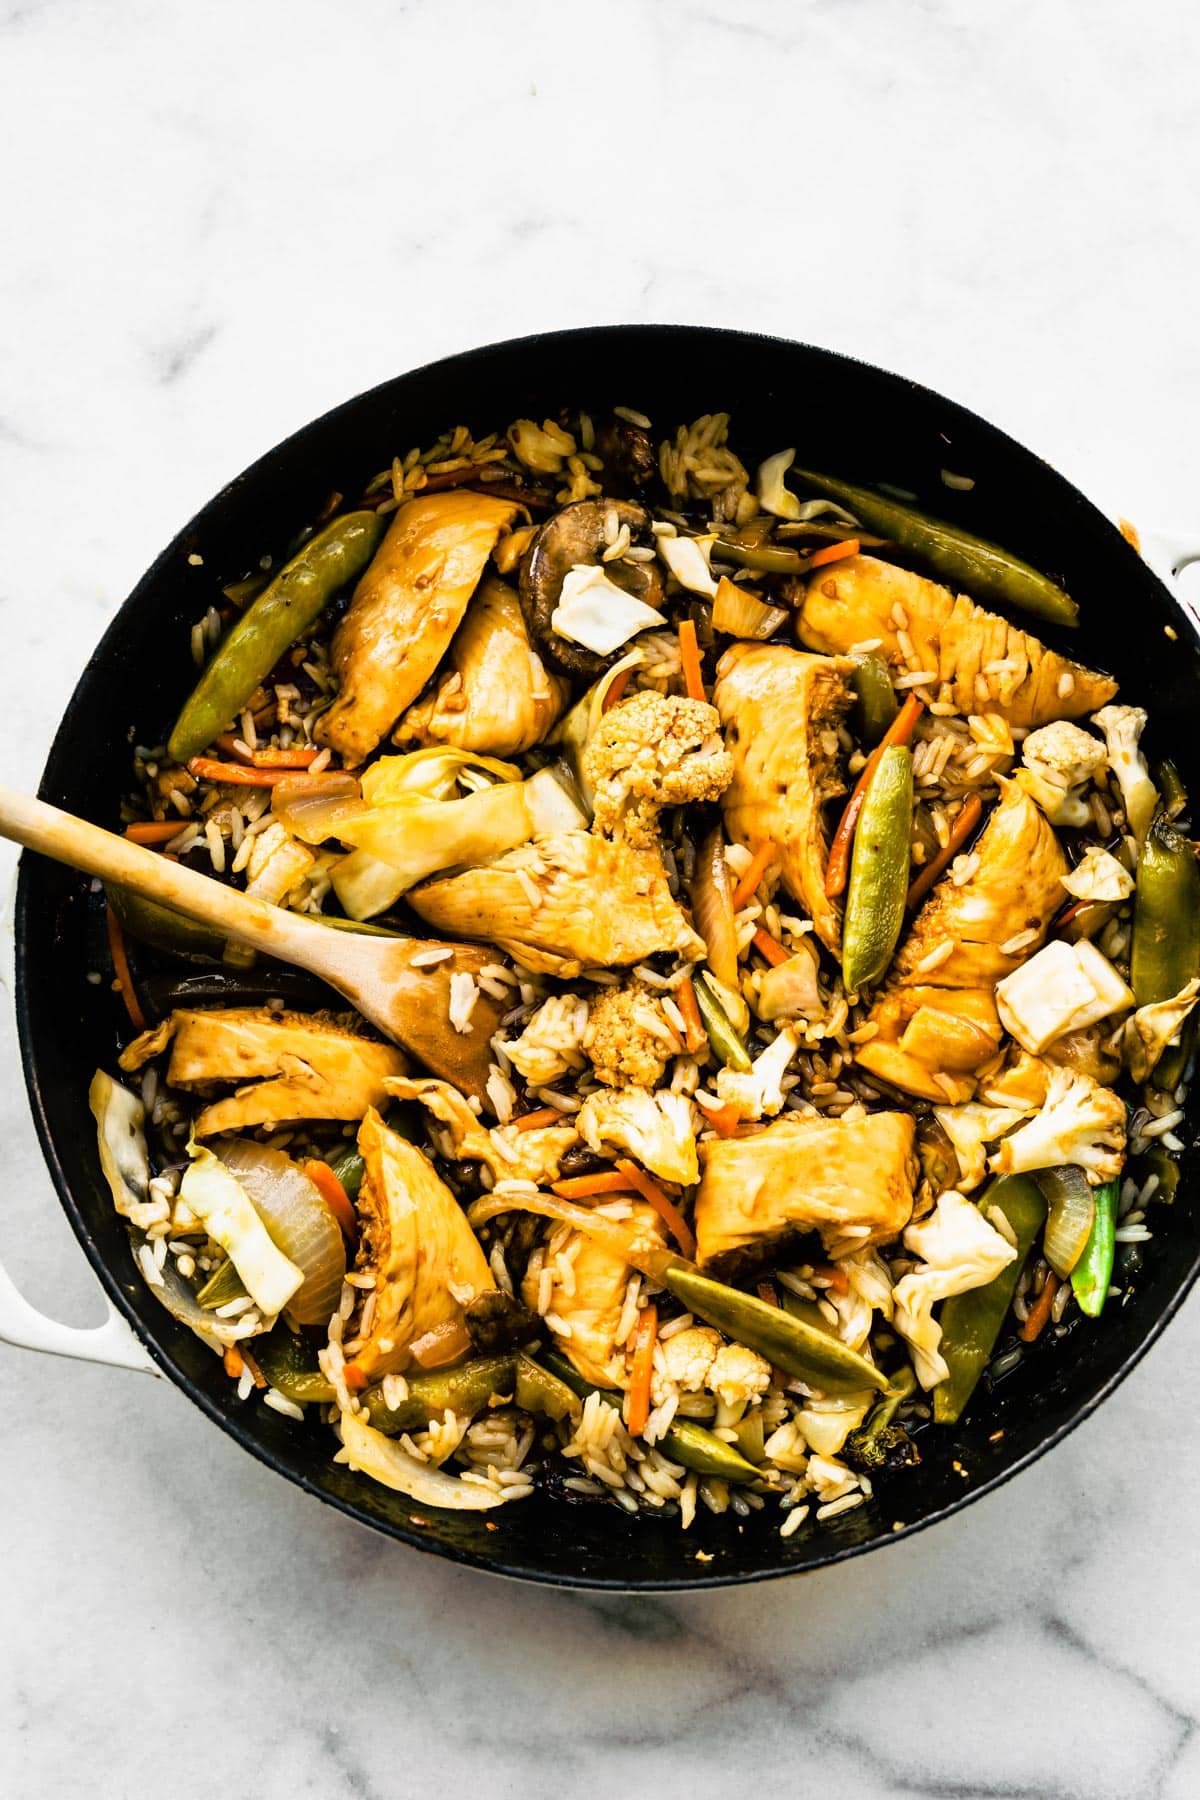 A wooden spoon stirring diced chicken breast and cooked Asian veggies in a pan.